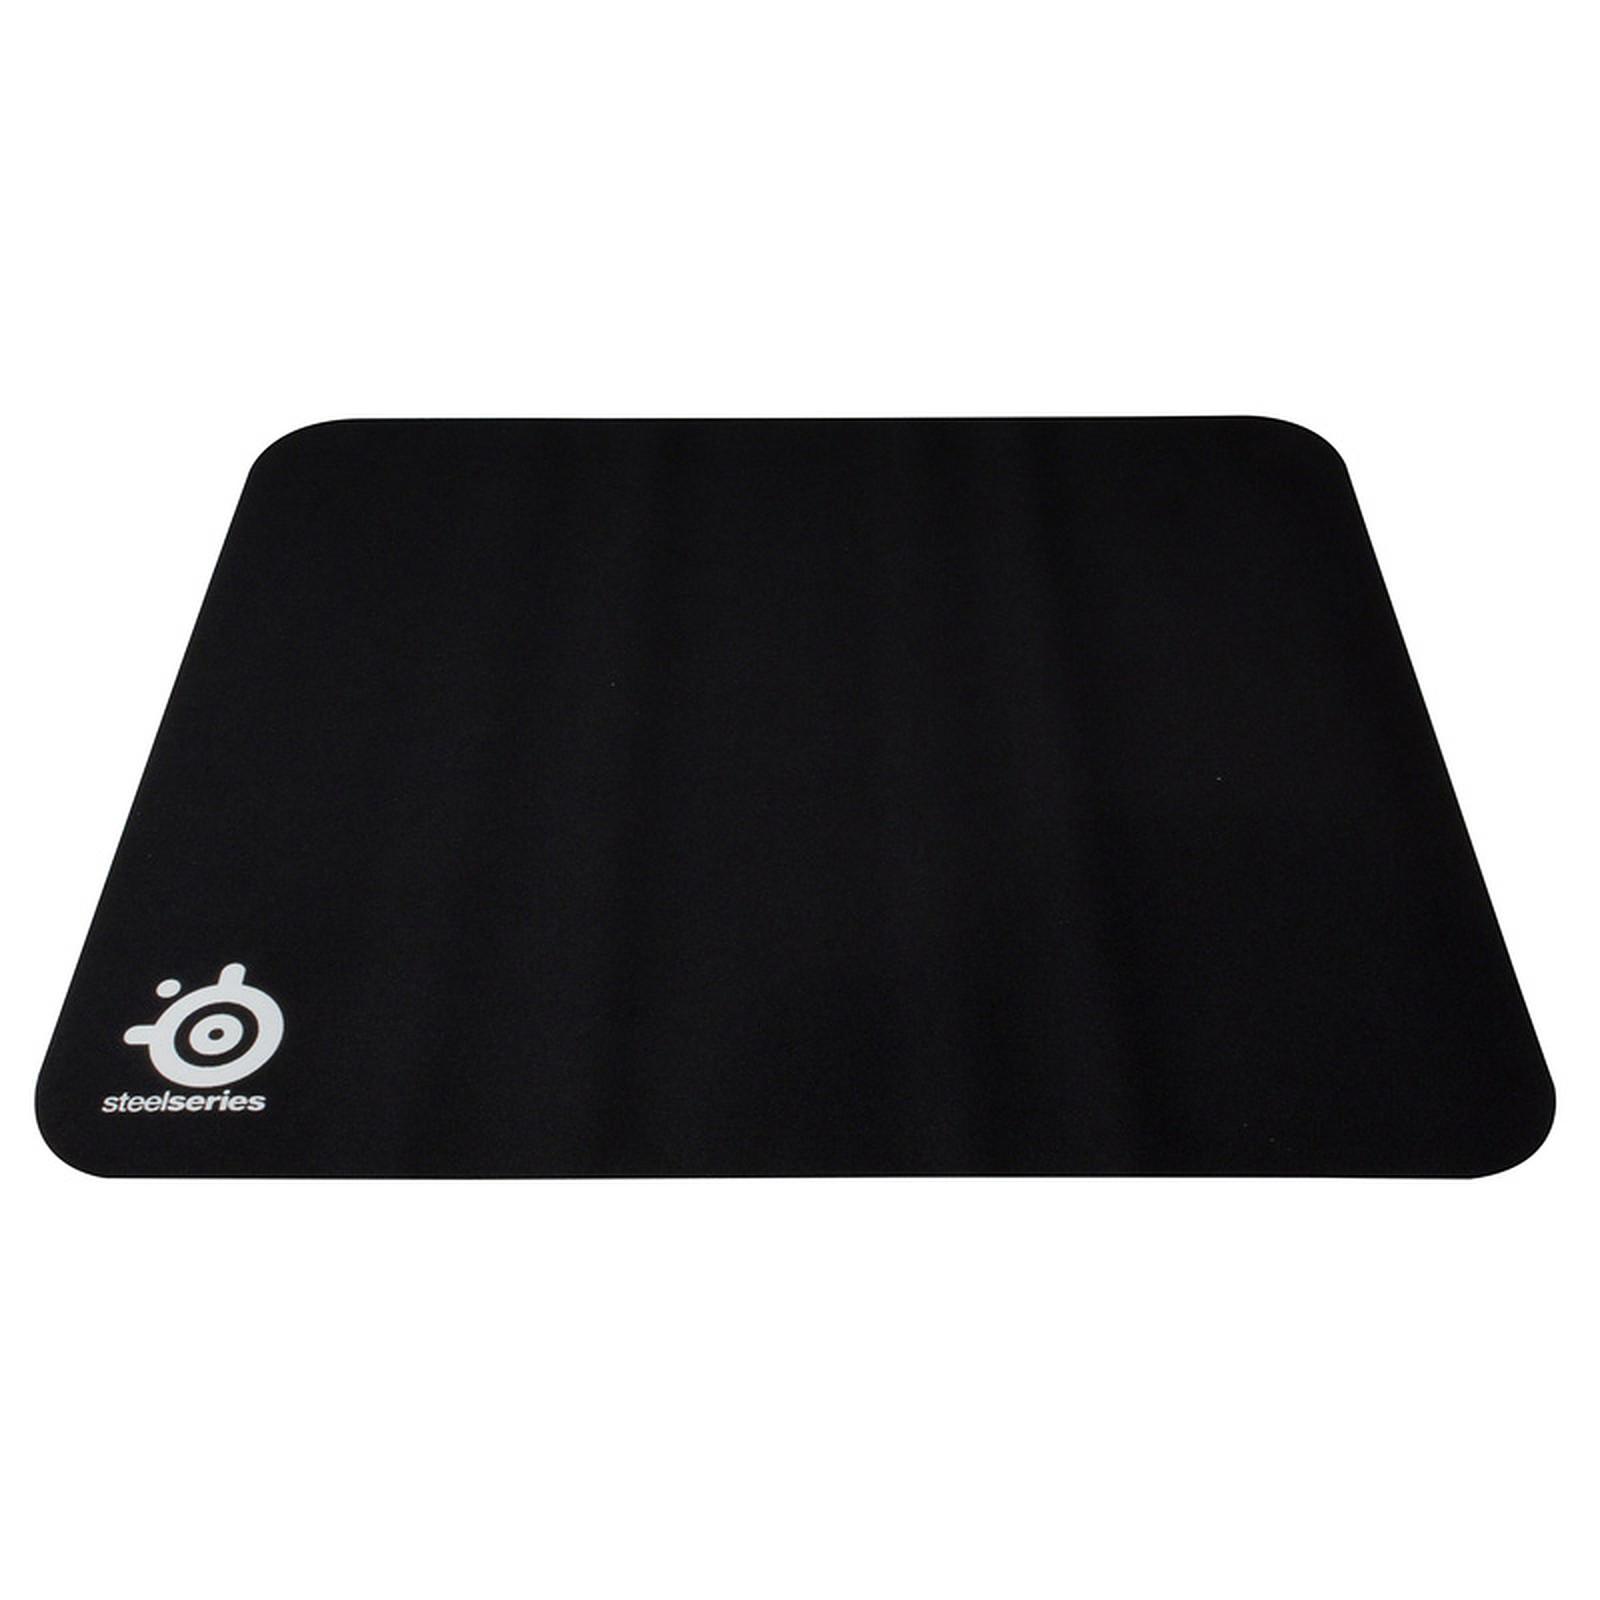 STEELSERIES QCK LARGE (QCK+) MOUSE PAD